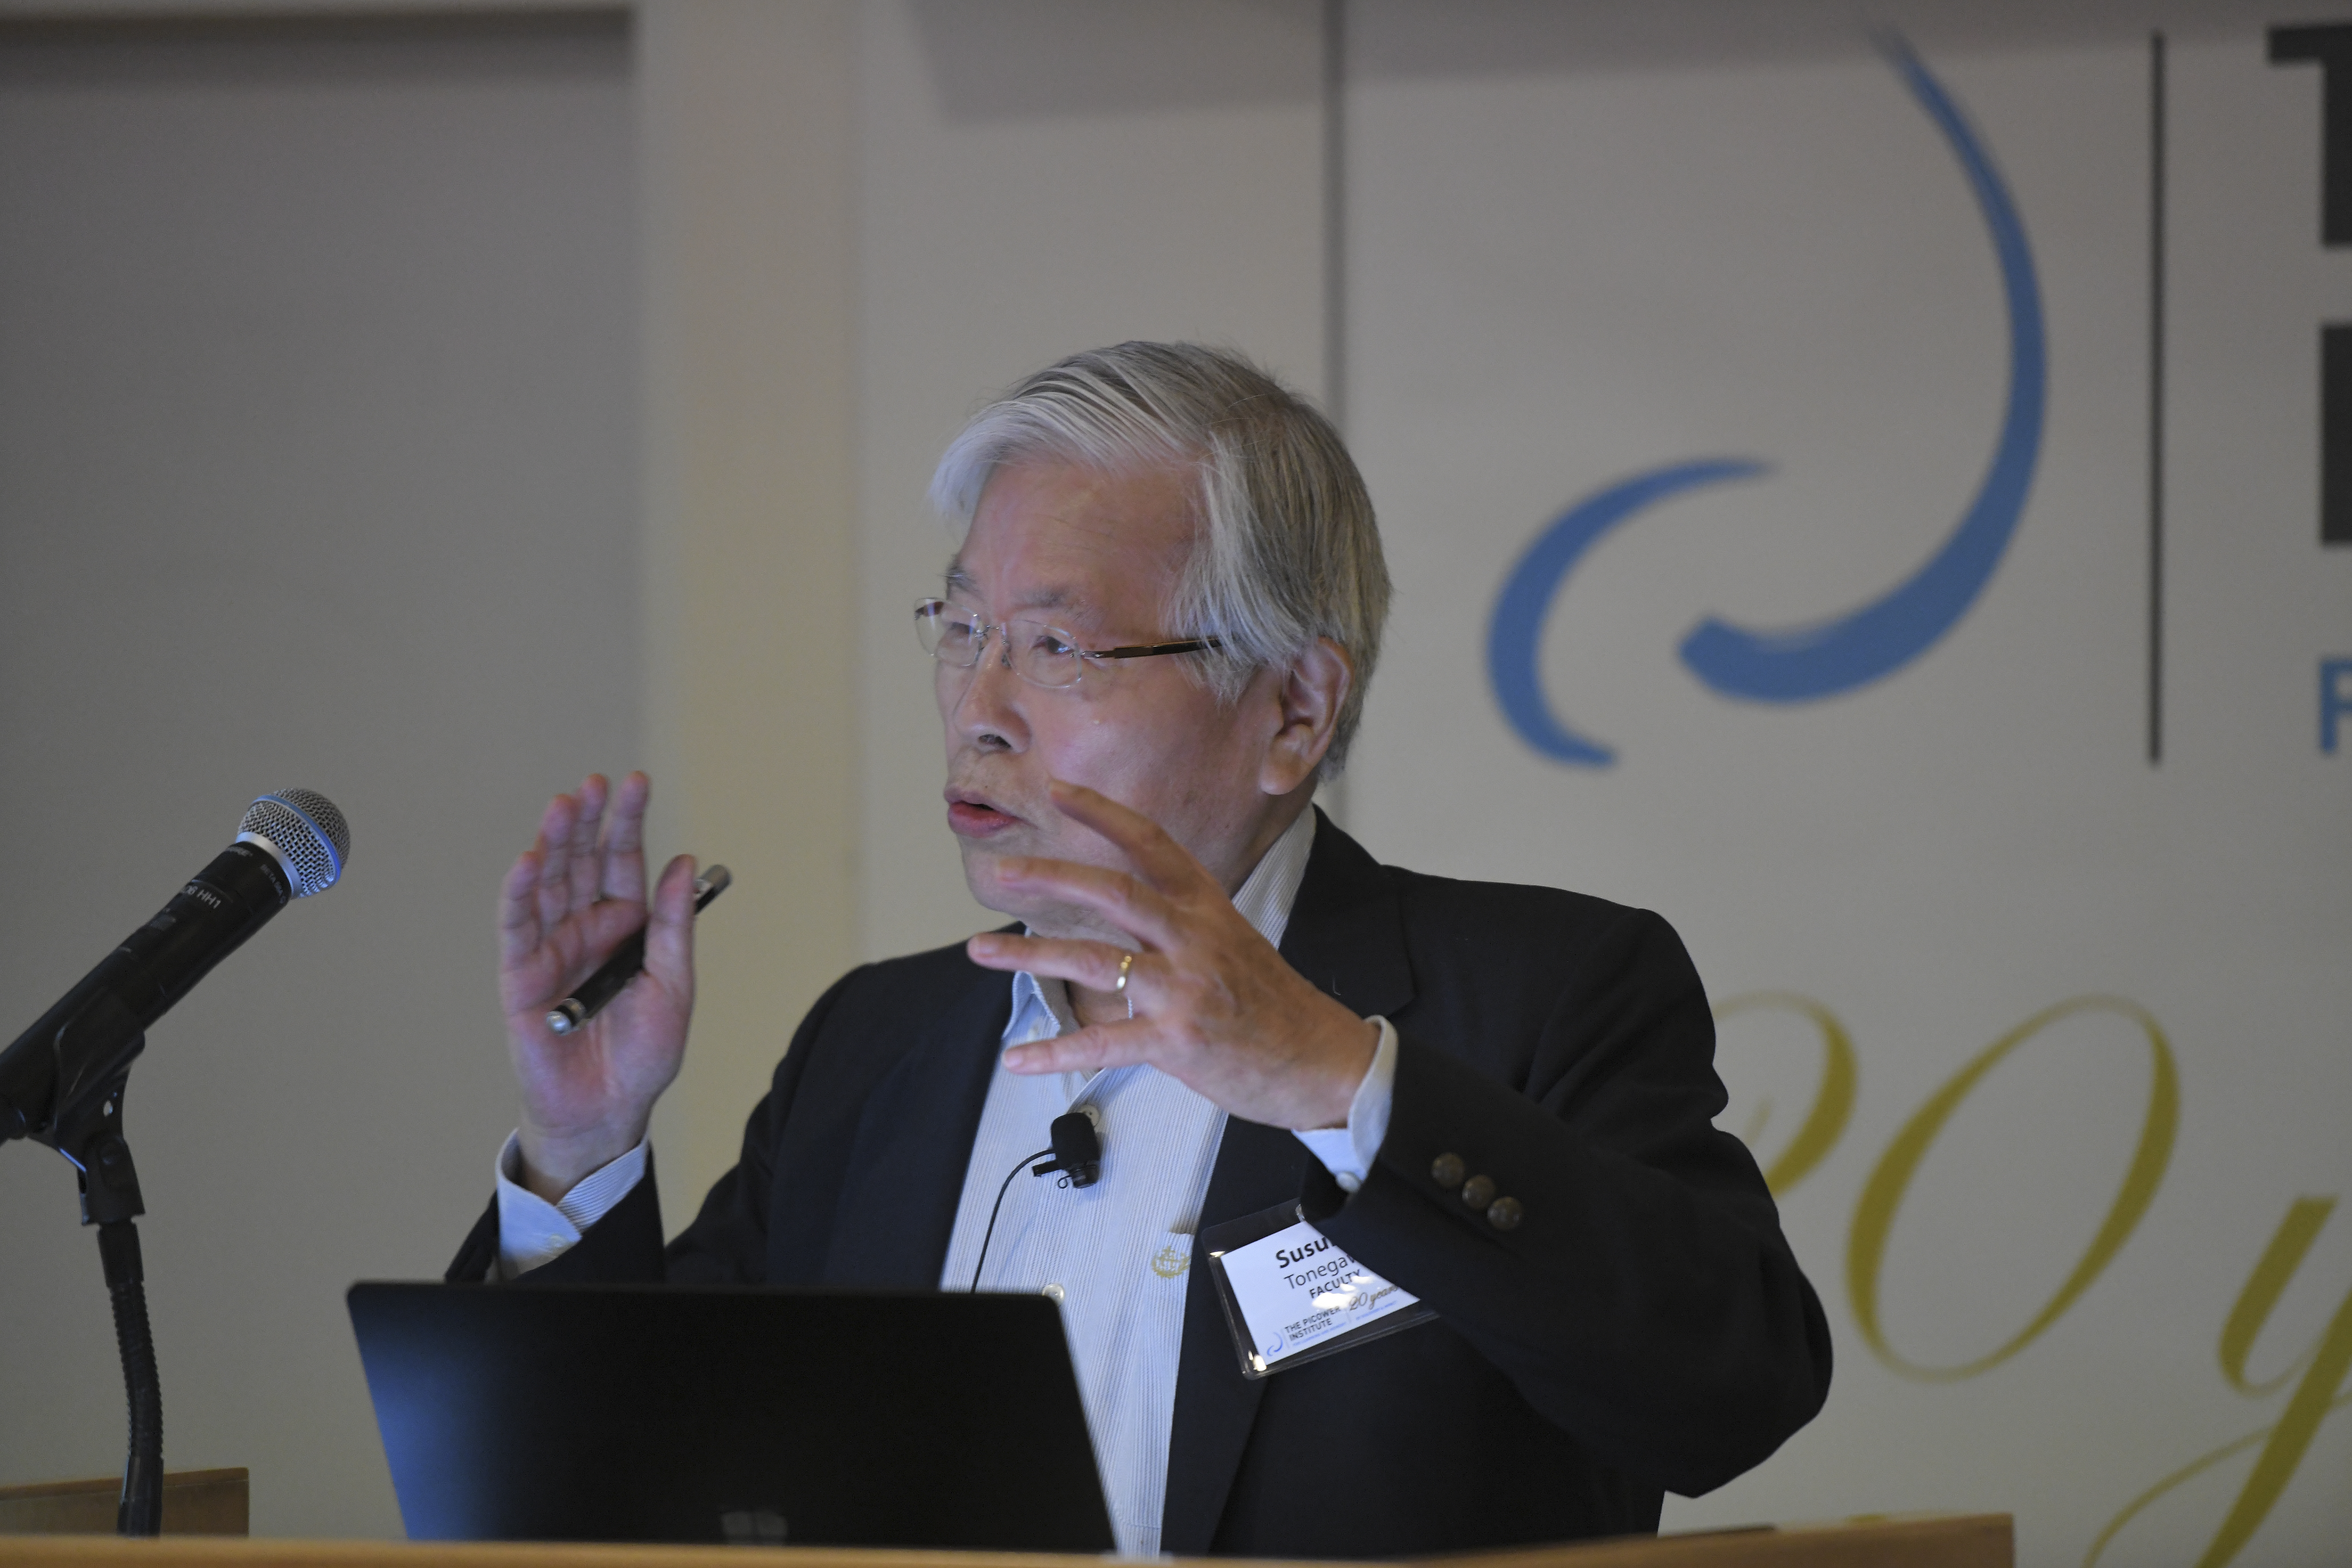 Susumu Tonegawa stands at a podium with the Picower Institute logo behind him. His hands are raised in an empatic gesture as he makes a point during a talk.